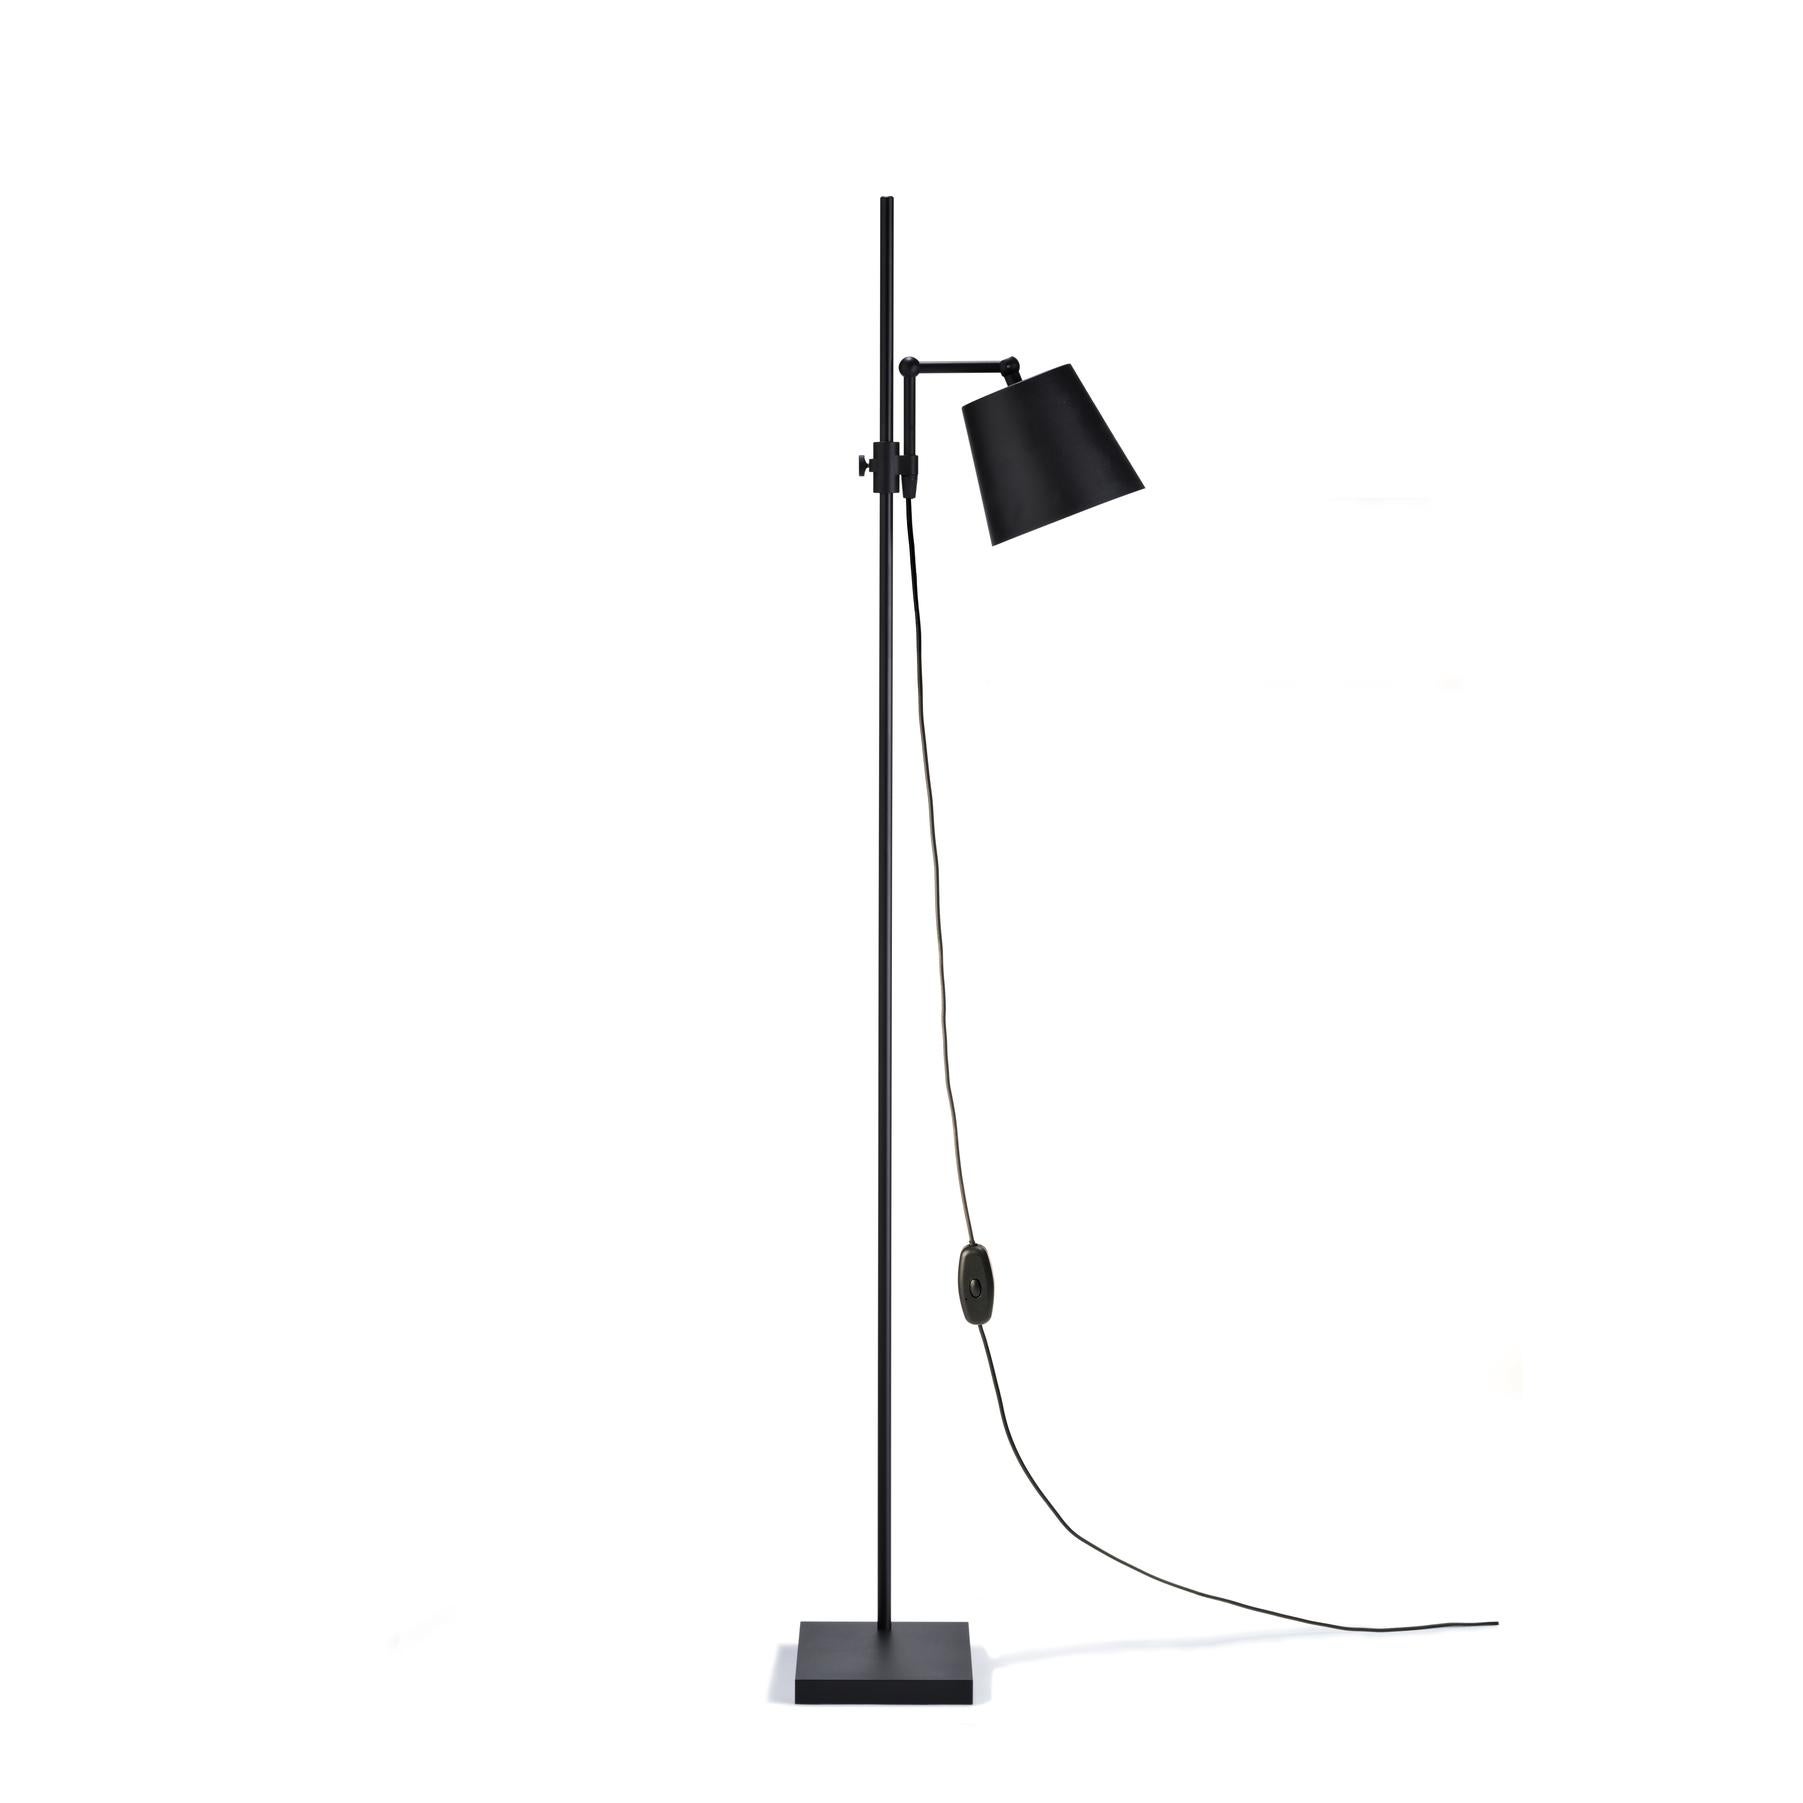 Floor Lamp designed by Anatomy Design in 2010. 

Inspired by her parents’ pharmaceutical work and their old lab equipment, Andrea Kleinloog from Anatomy Design designed the Lab Light mixing steel, brass and porcelain.

This brought on a desire